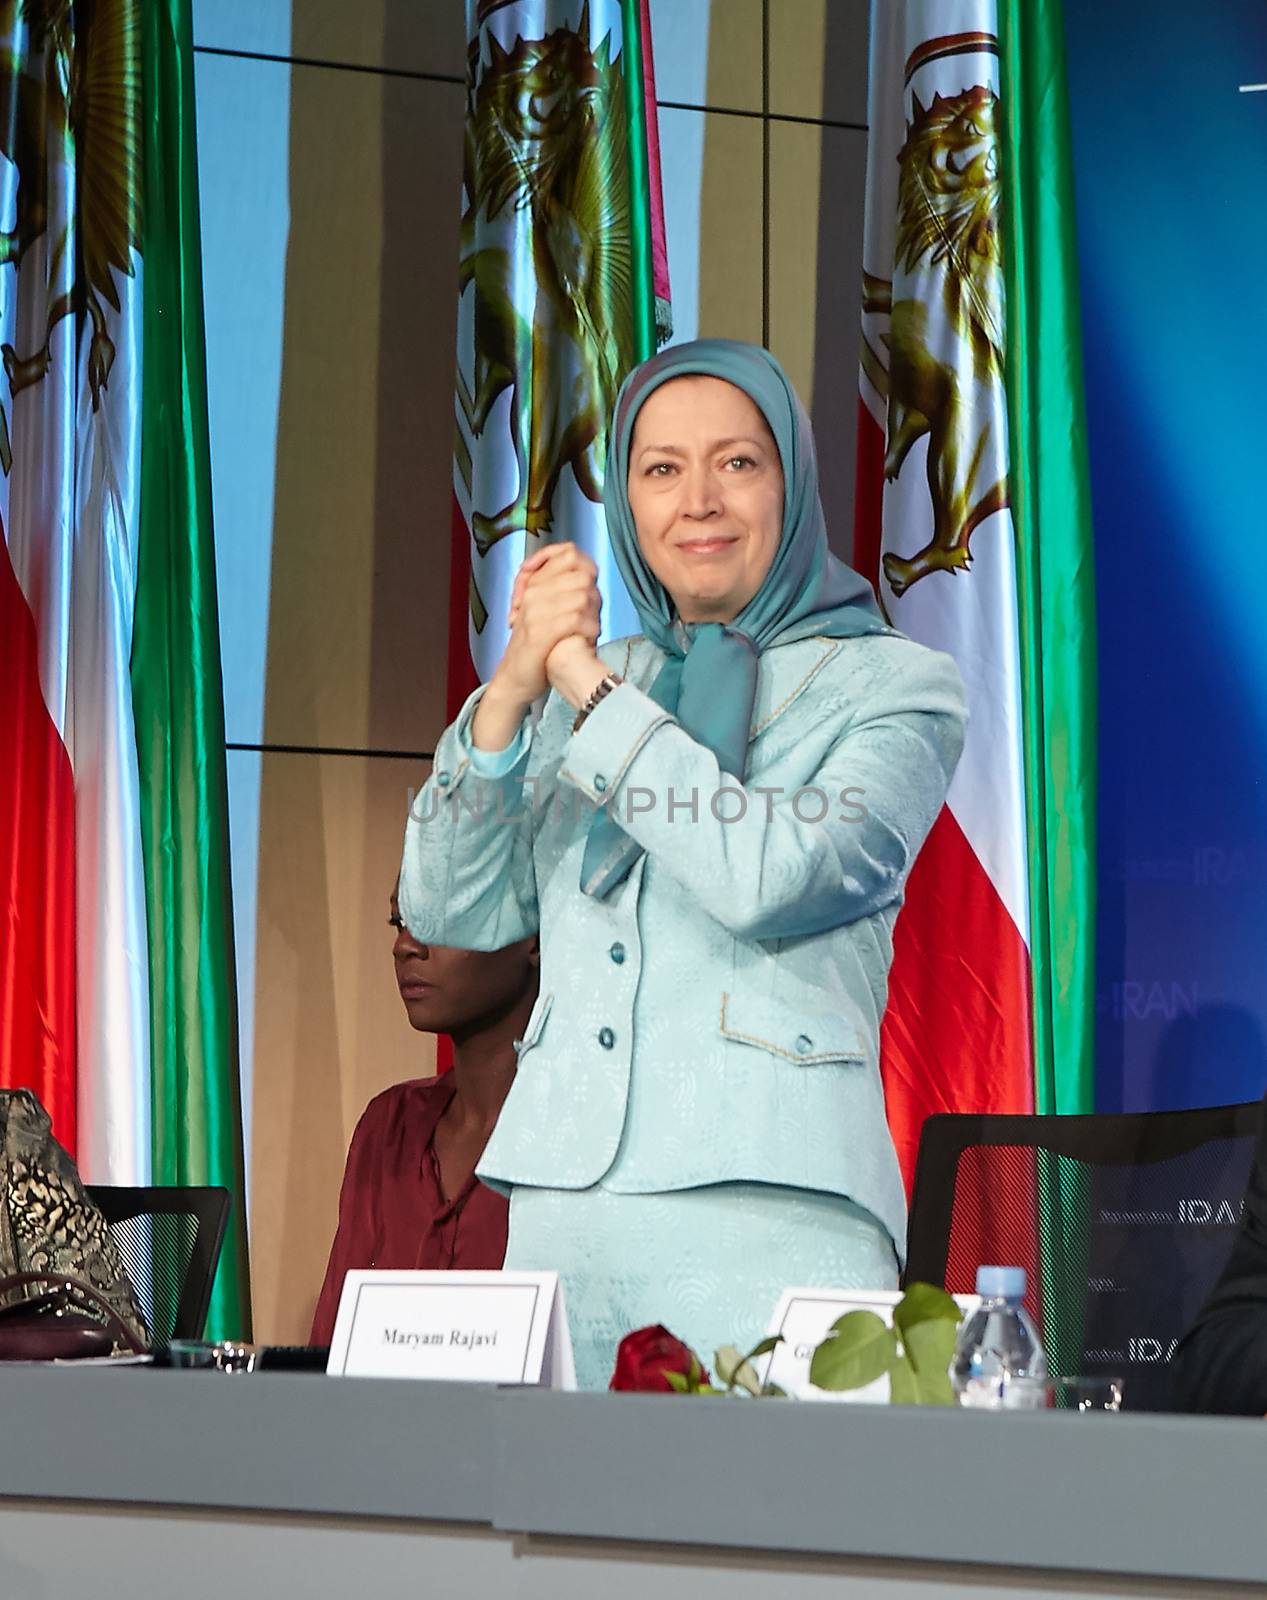 FRANCE, Paris: Iranian politician and President elect of National Council of Resistance of Iran (NCRI) Maryam Radjavi is pictured during the 2015 World Day Against the Death Penalty, in Paris, on October 10, 2015. The international conference held in Paris on the occasion of the World Day Against the Death Penalty highlighted the surge of executions in Iran and need for urgent action. The Iranian regime has executed more than 120,000 political prisoners in the past 34 years.